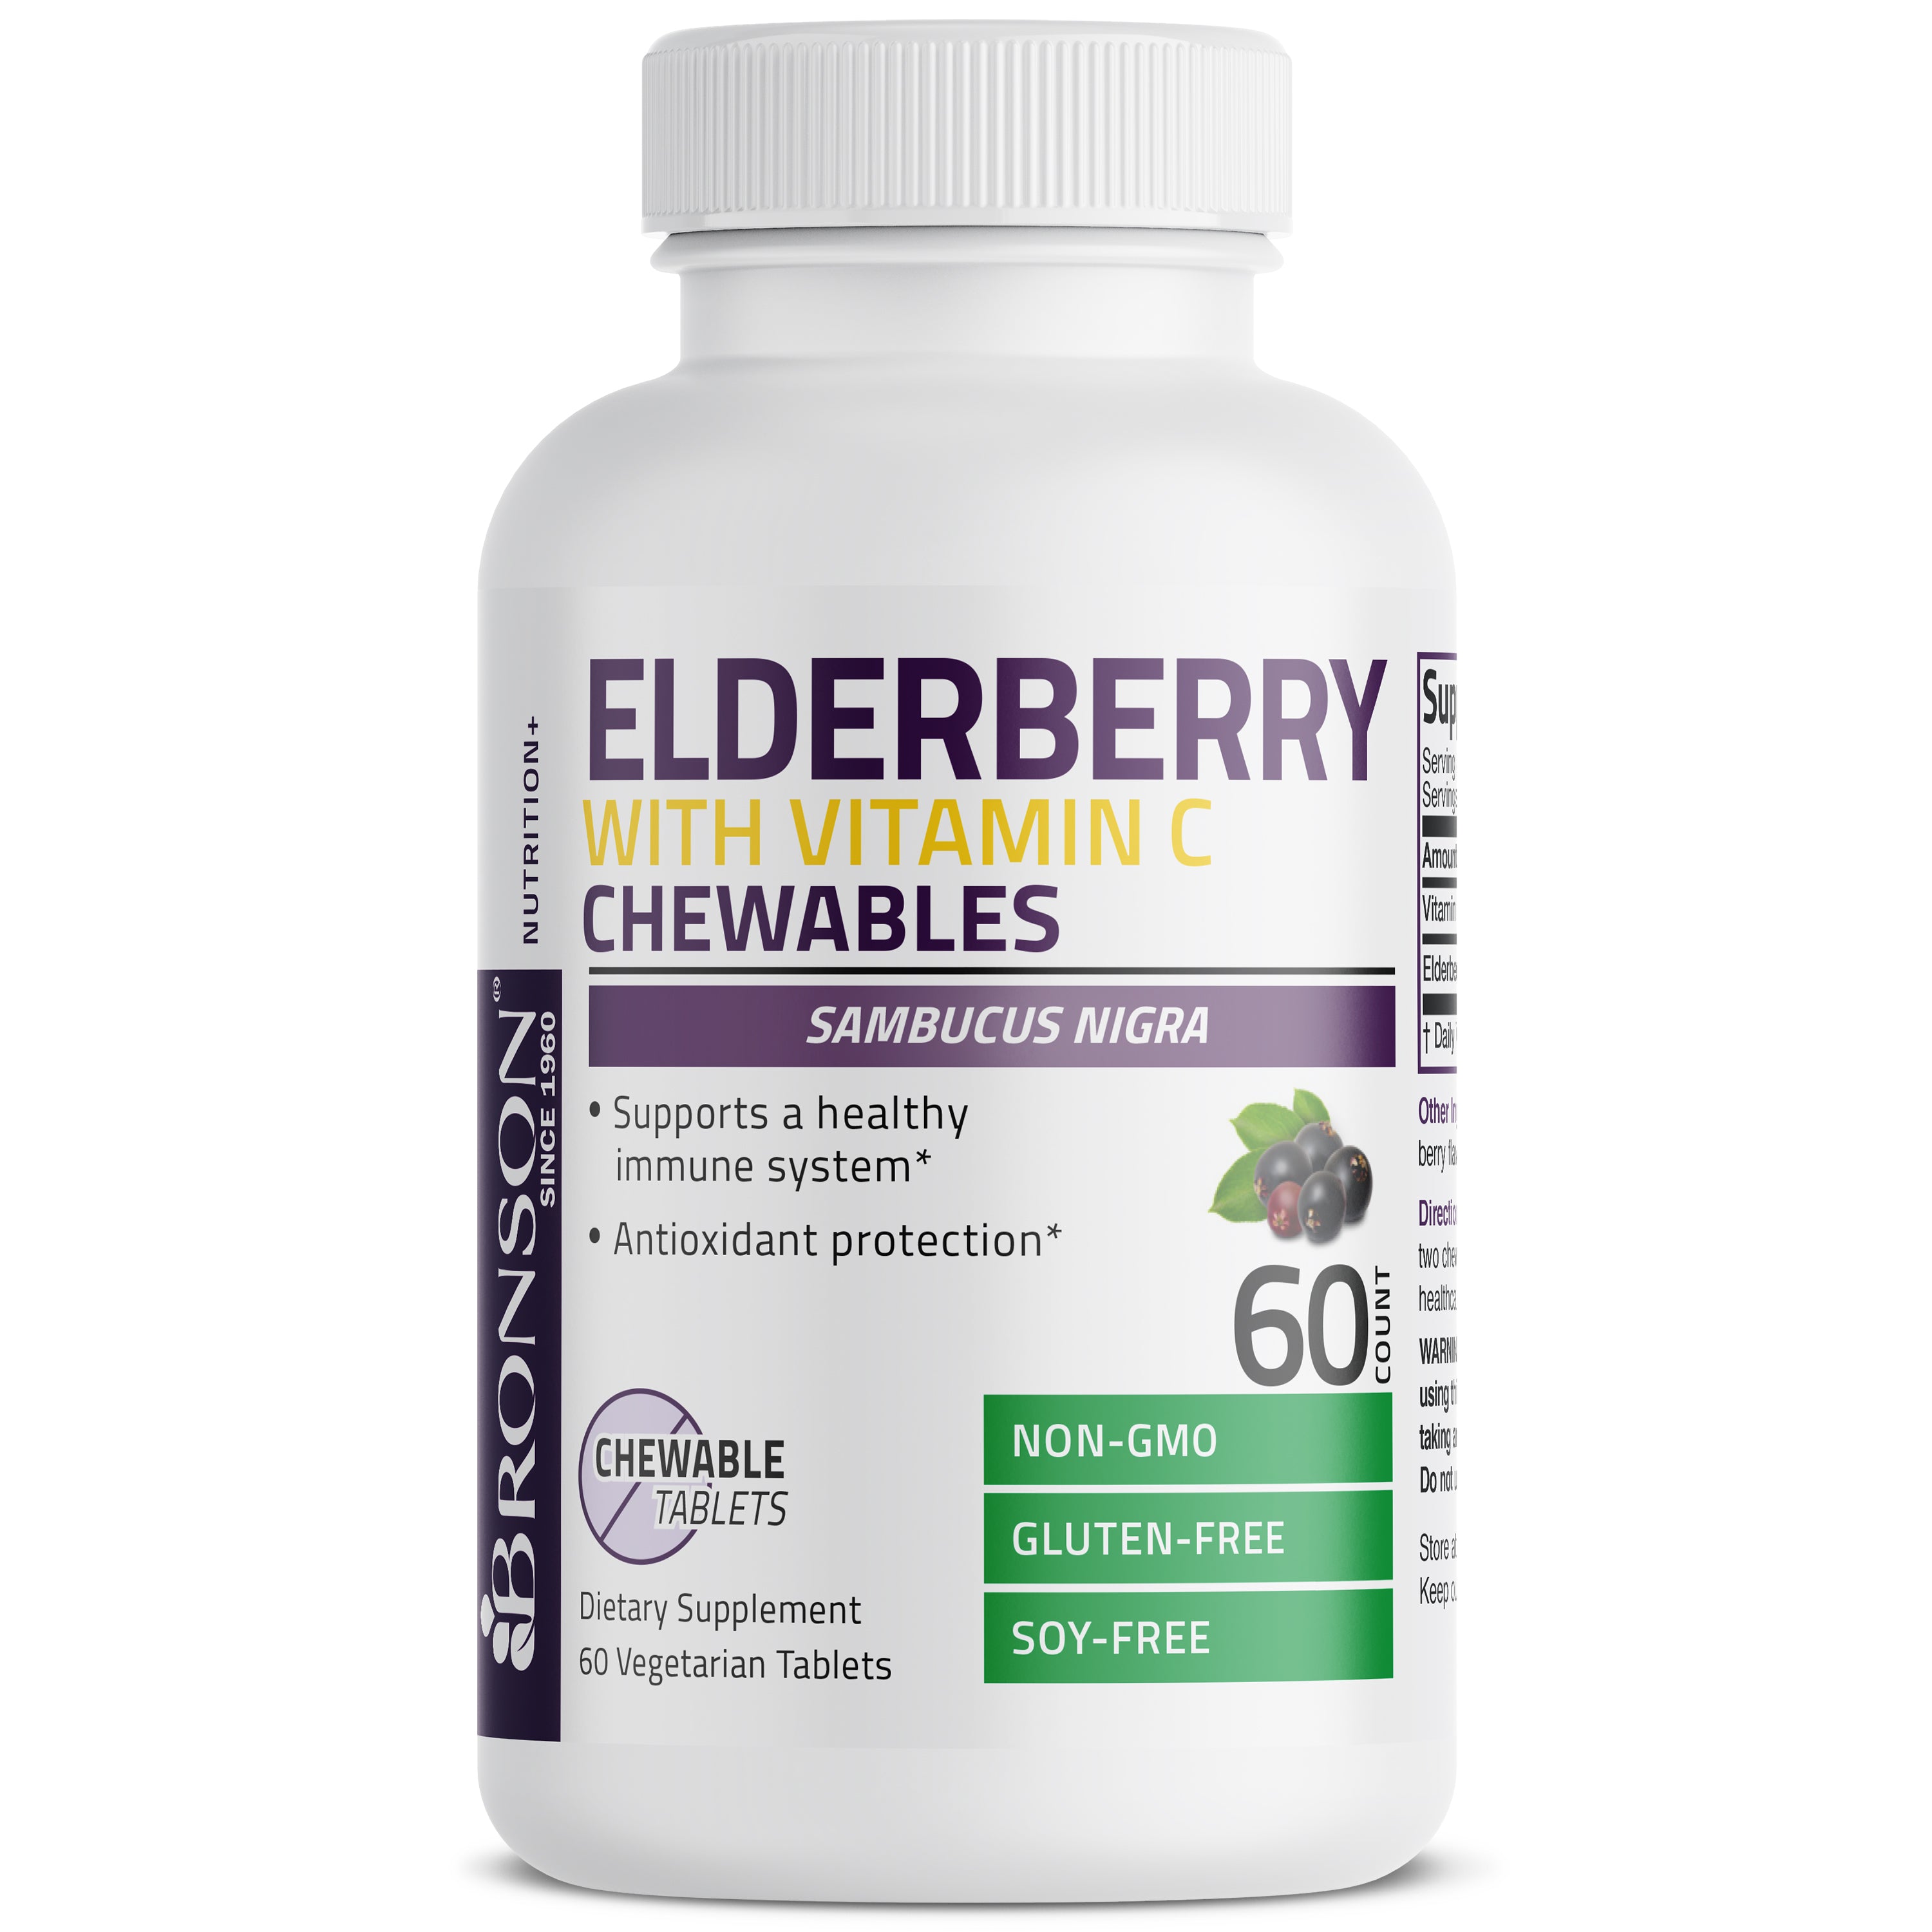 Elderberry Chewables with Vitamin C - Berry - 60 Vegetarian Tablets view 3 of 5